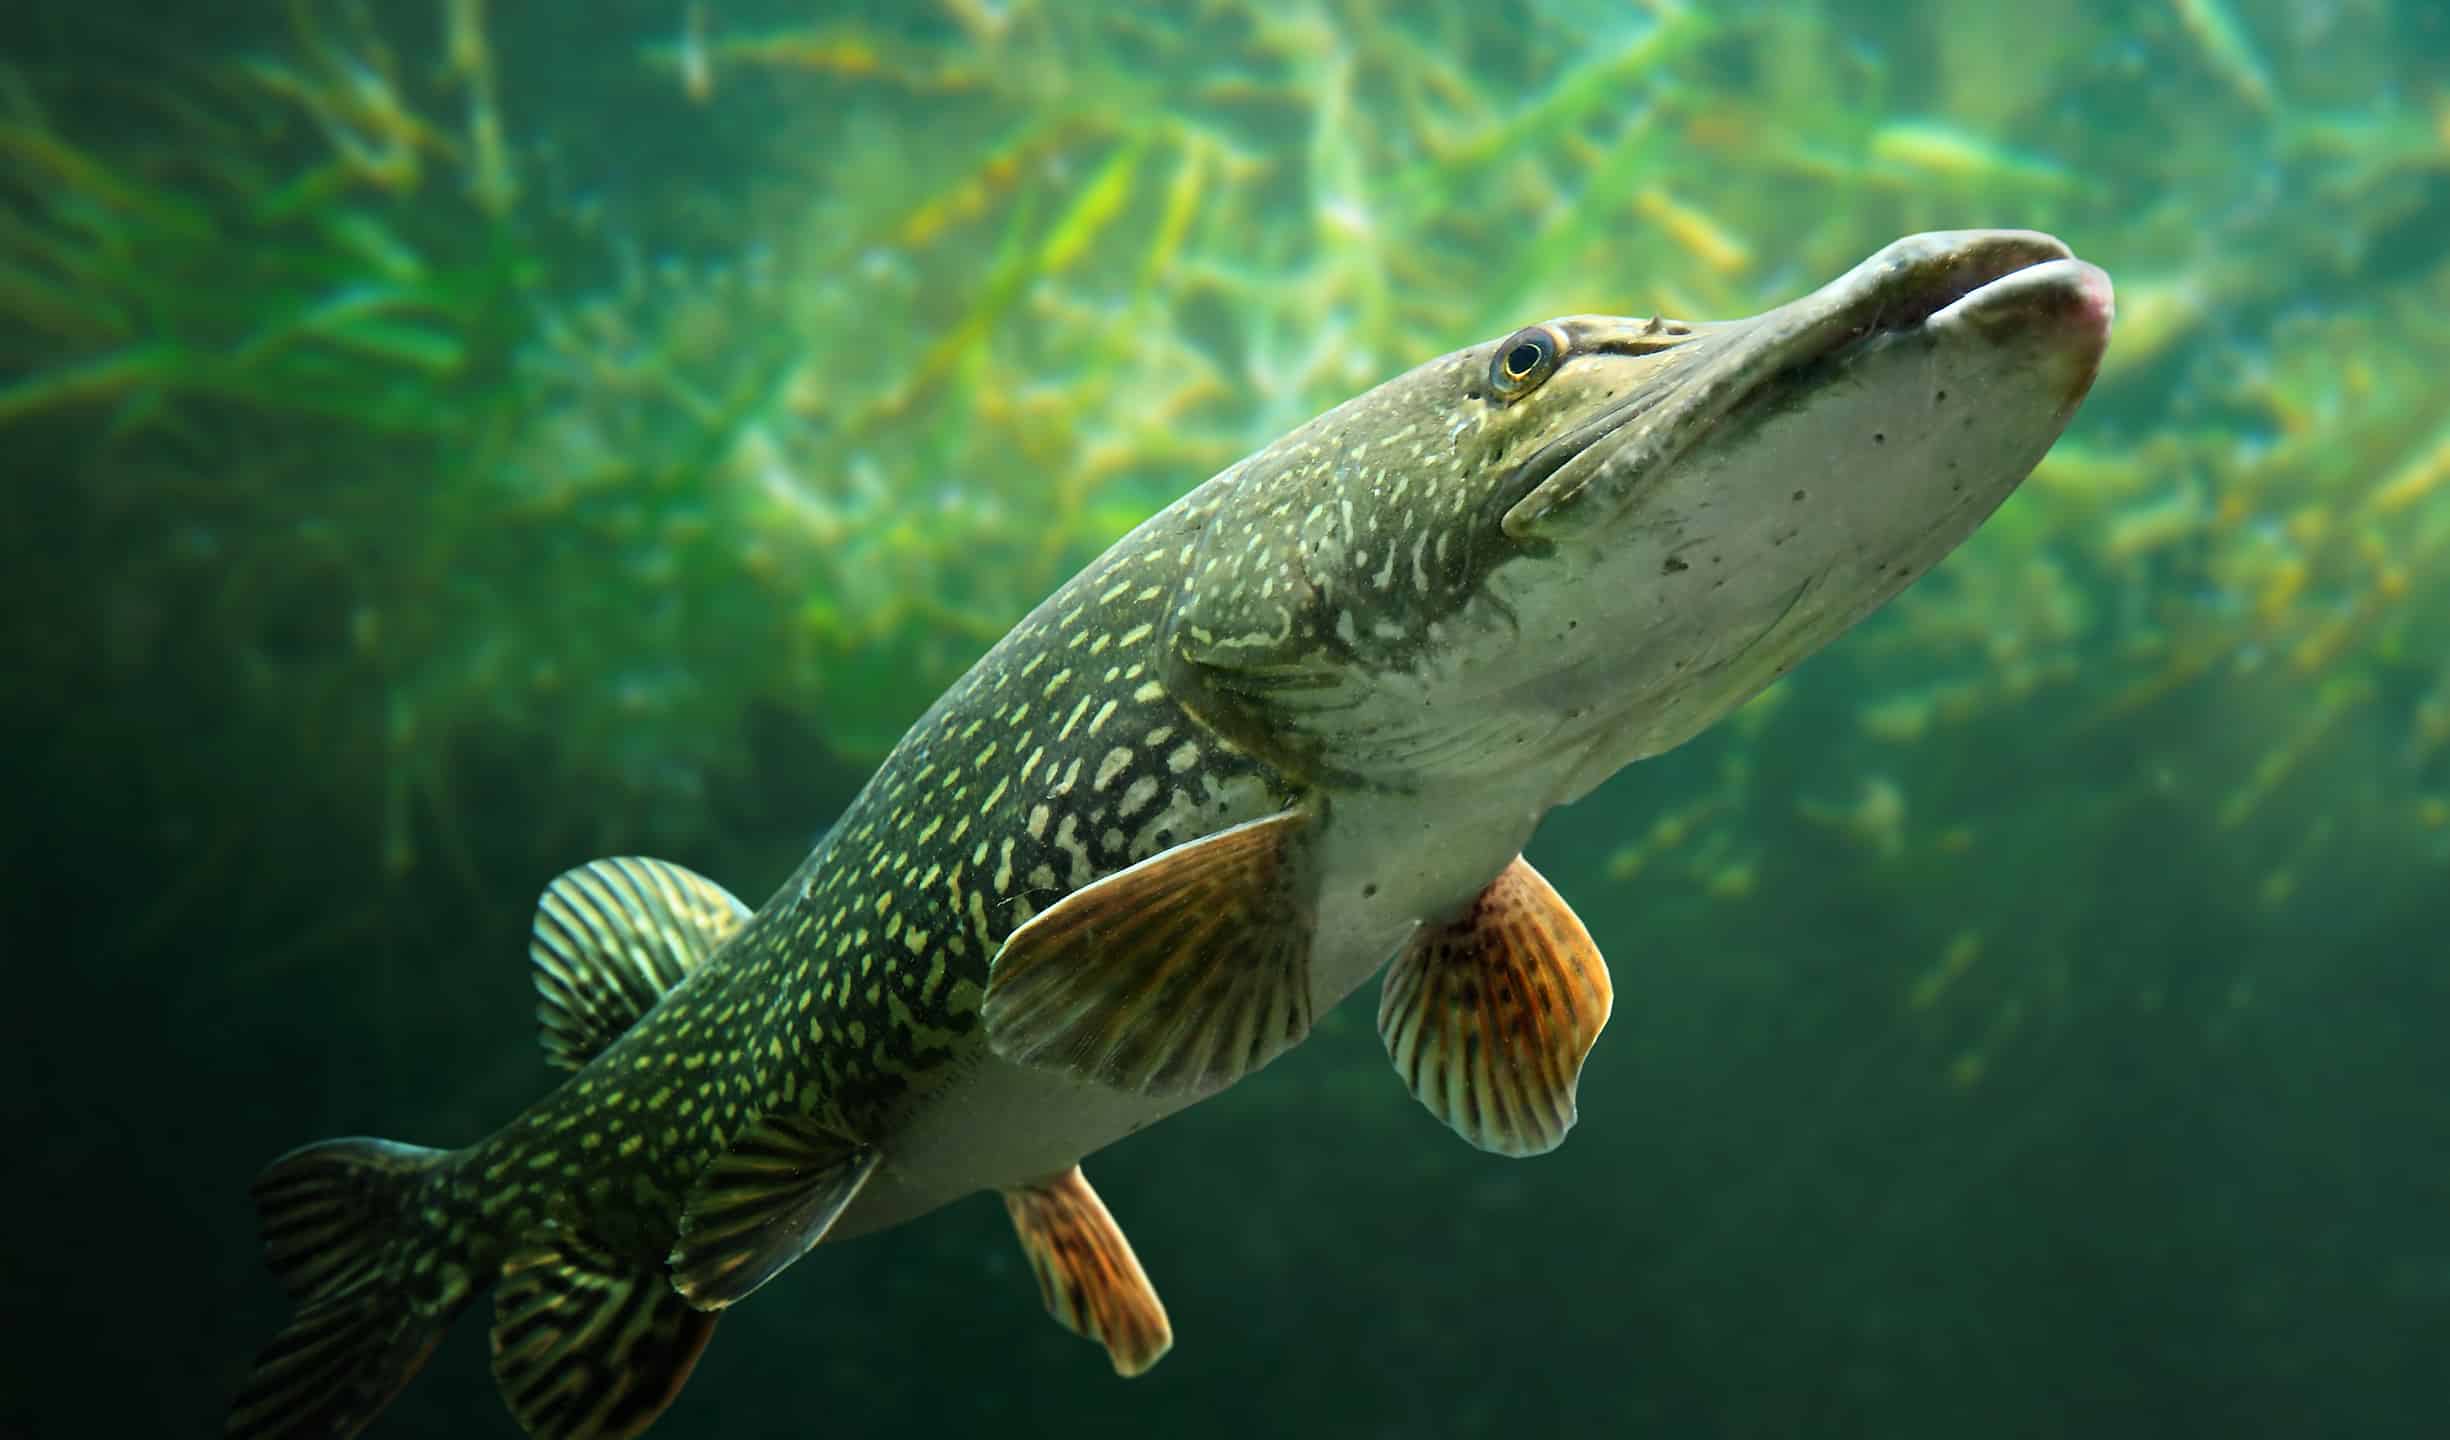 Underwater photo of a big Northern Pike